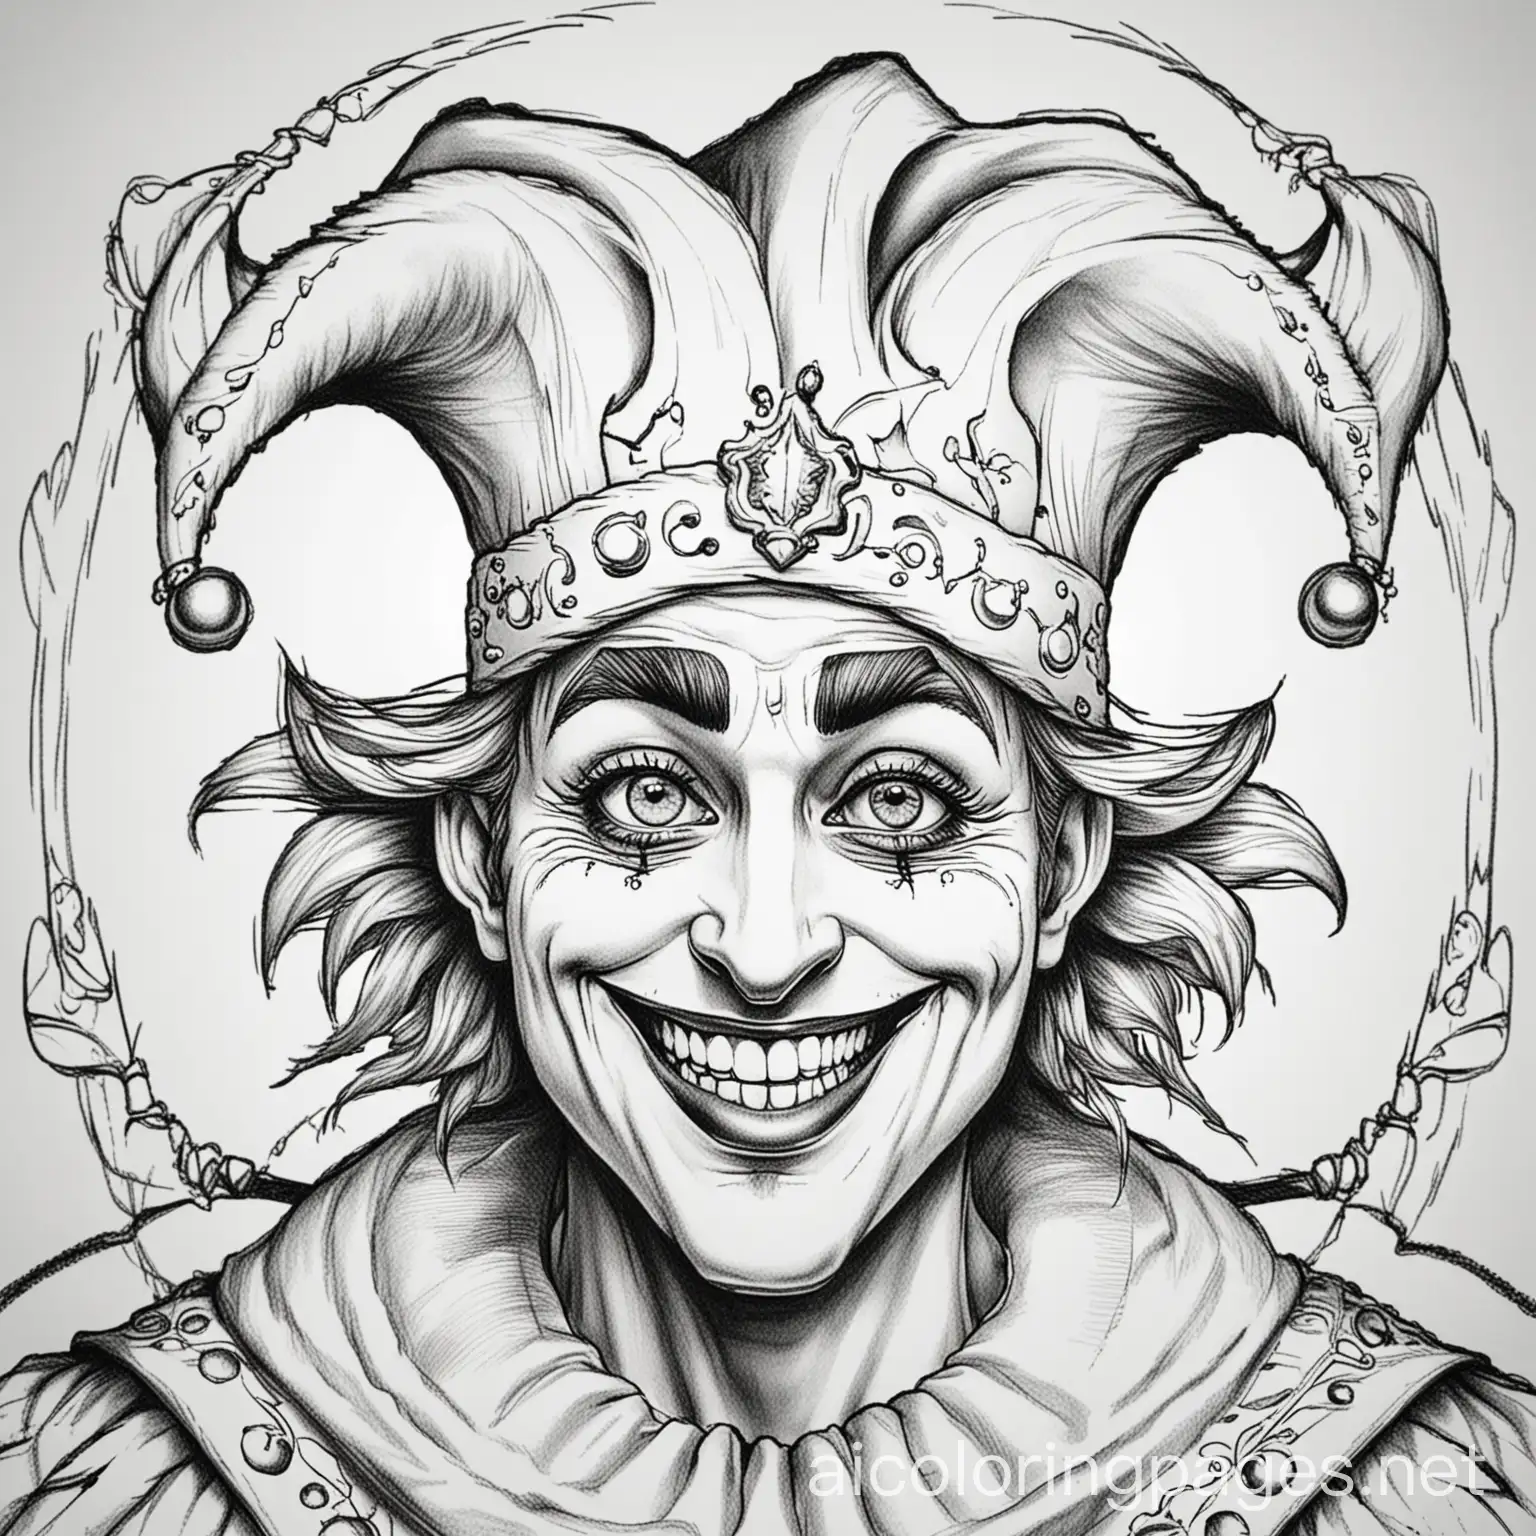 another jester joker coloring book, Coloring Page, black and white, line art, white background, Simplicity, Ample White Space. The background of the coloring page is plain white to make it easy for young children to color within the lines. The outlines of all the subjects are easy to distinguish, making it simple for kids to color without too much difficulty